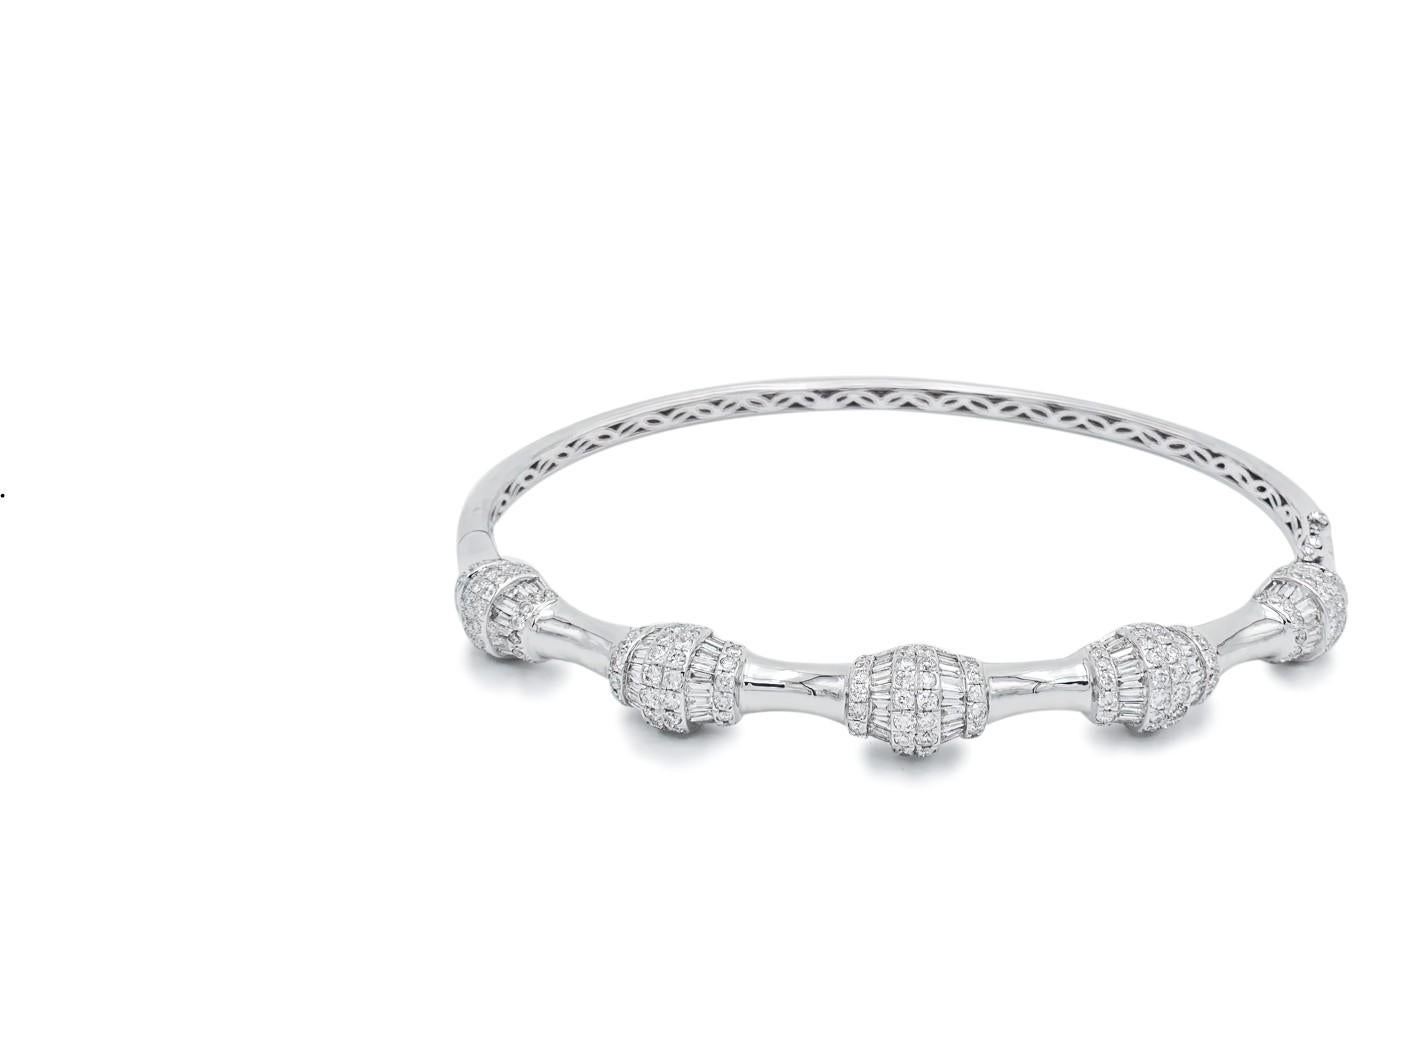 Artisan Baguette-Cut Diamonds and Round Diamonds Set in 18k White Gold Bangle For Sale